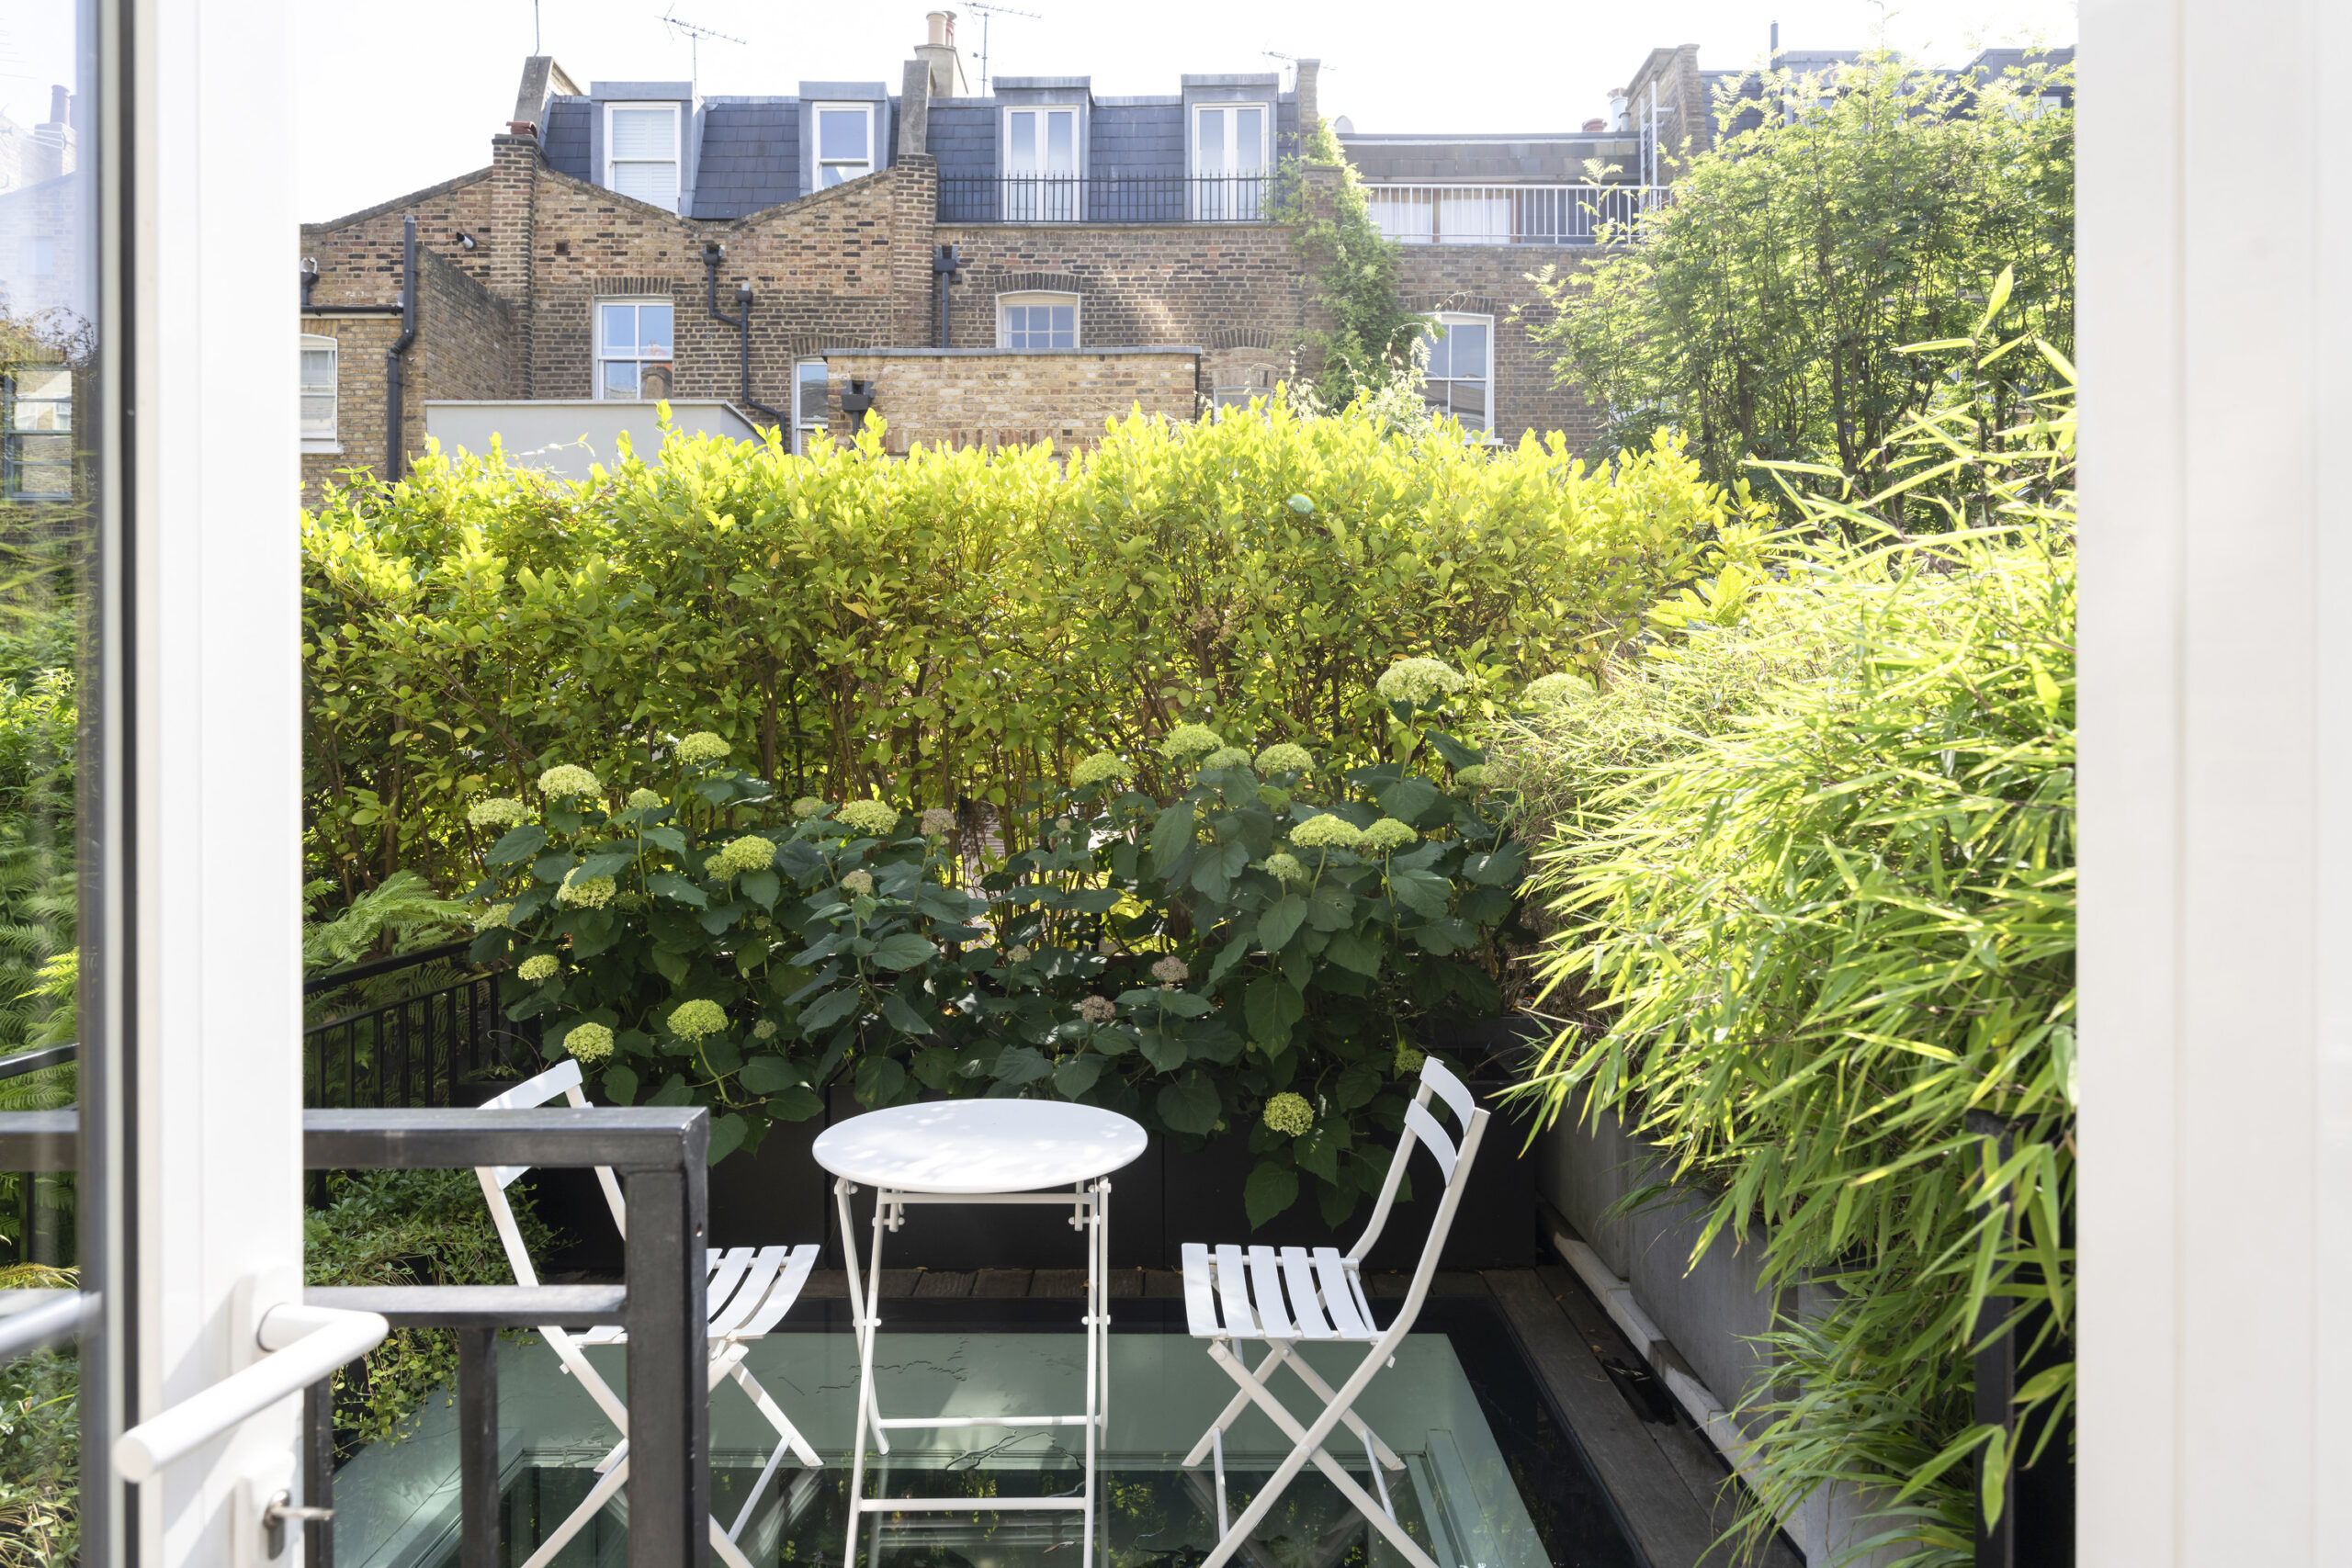 Private outdoor dining area of a luxury Notting Hill maisonette for sale